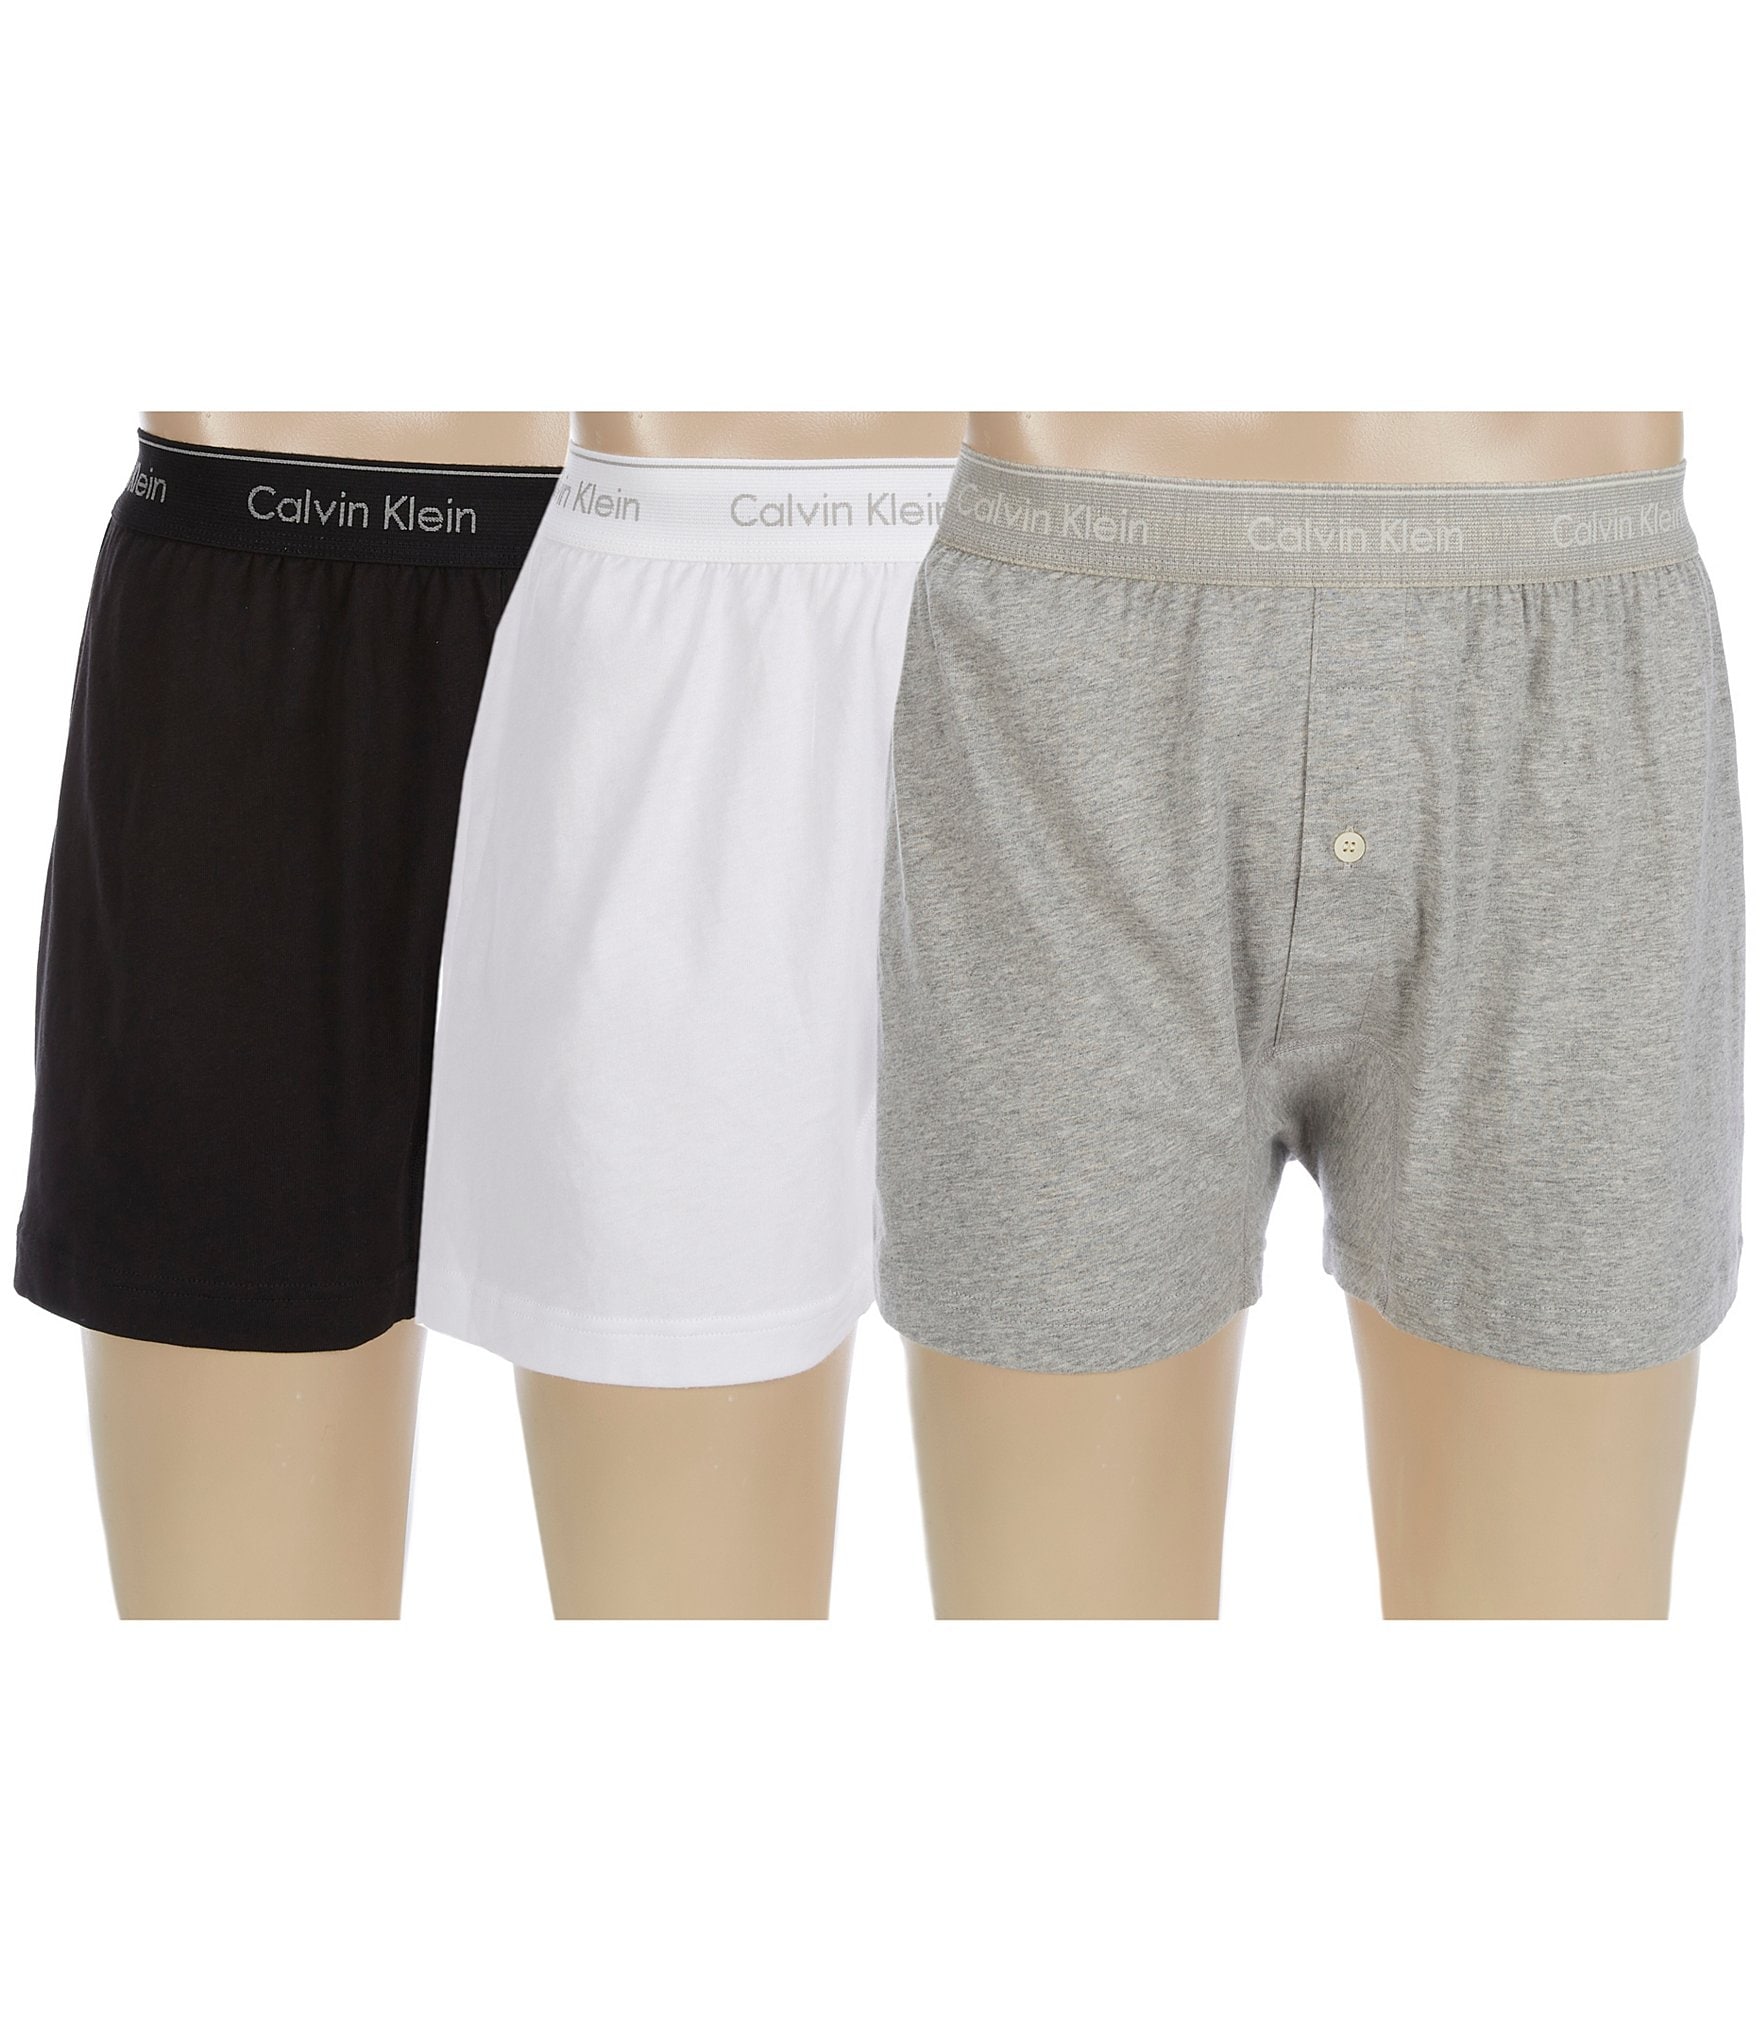 First Mince admiration Calvin Klein Cotton Classic Solid Knit Boxers 3-Pack | Dillard's